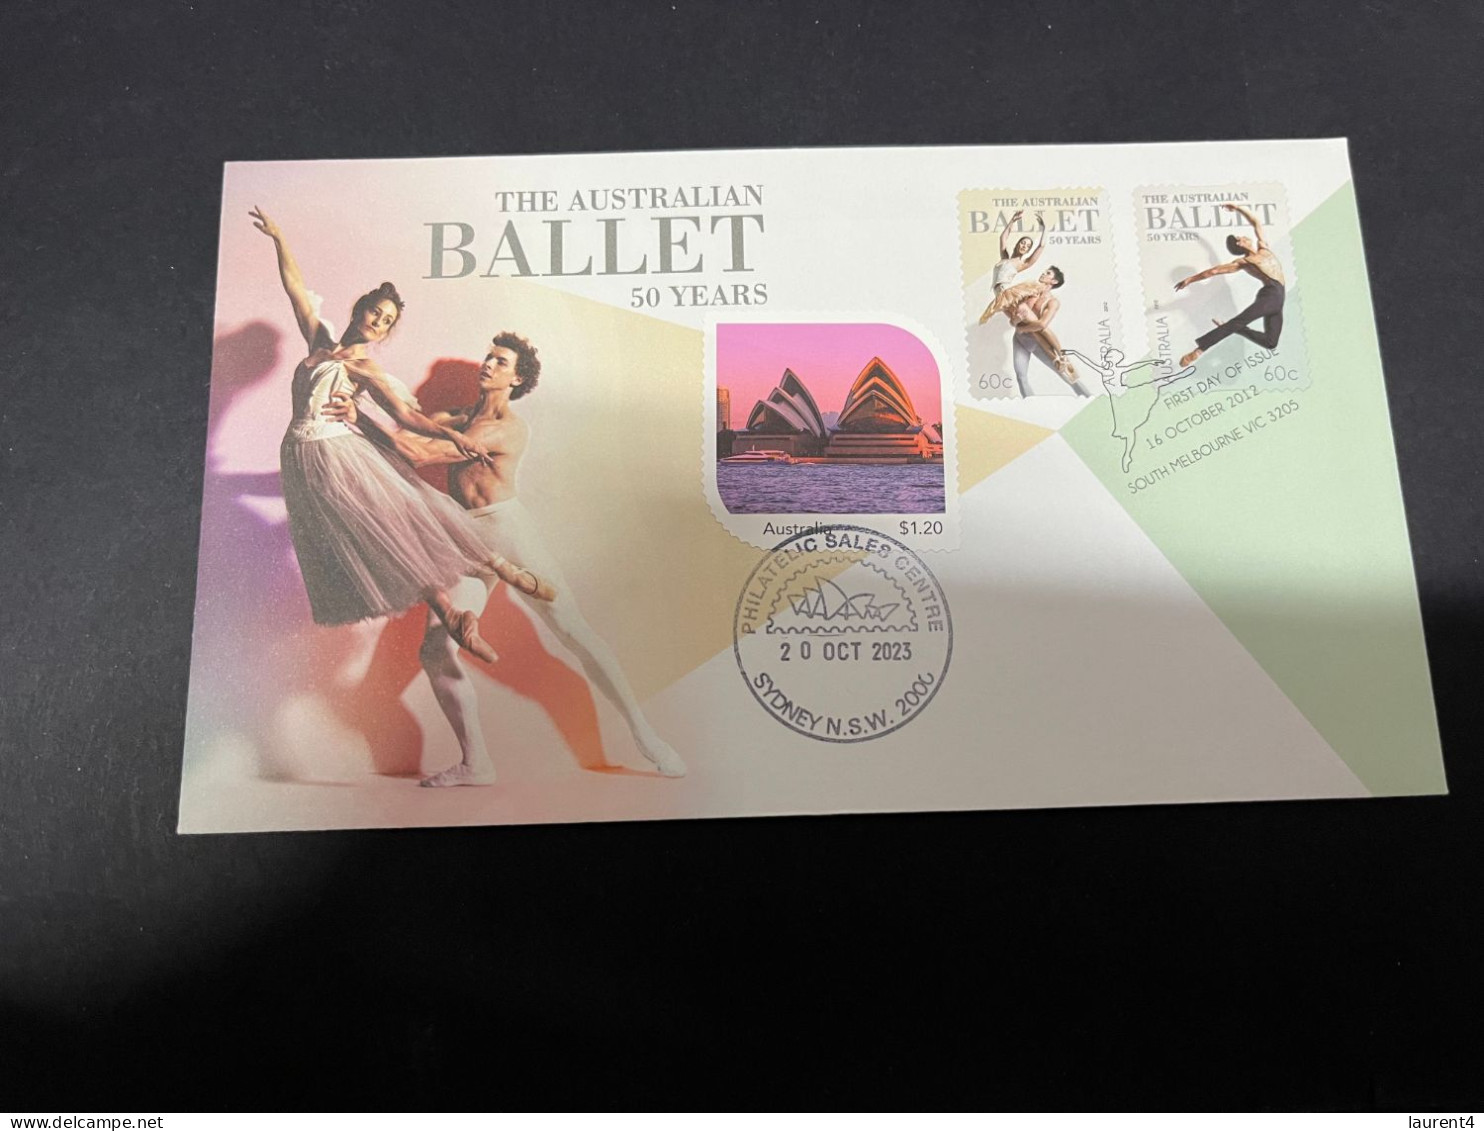 11-11-2023 (1 V 54) Sydney Opera House Celebrate The 50th Anniversary Of It's Opening (20 October 2023) 2012 Ballet FDC - Covers & Documents